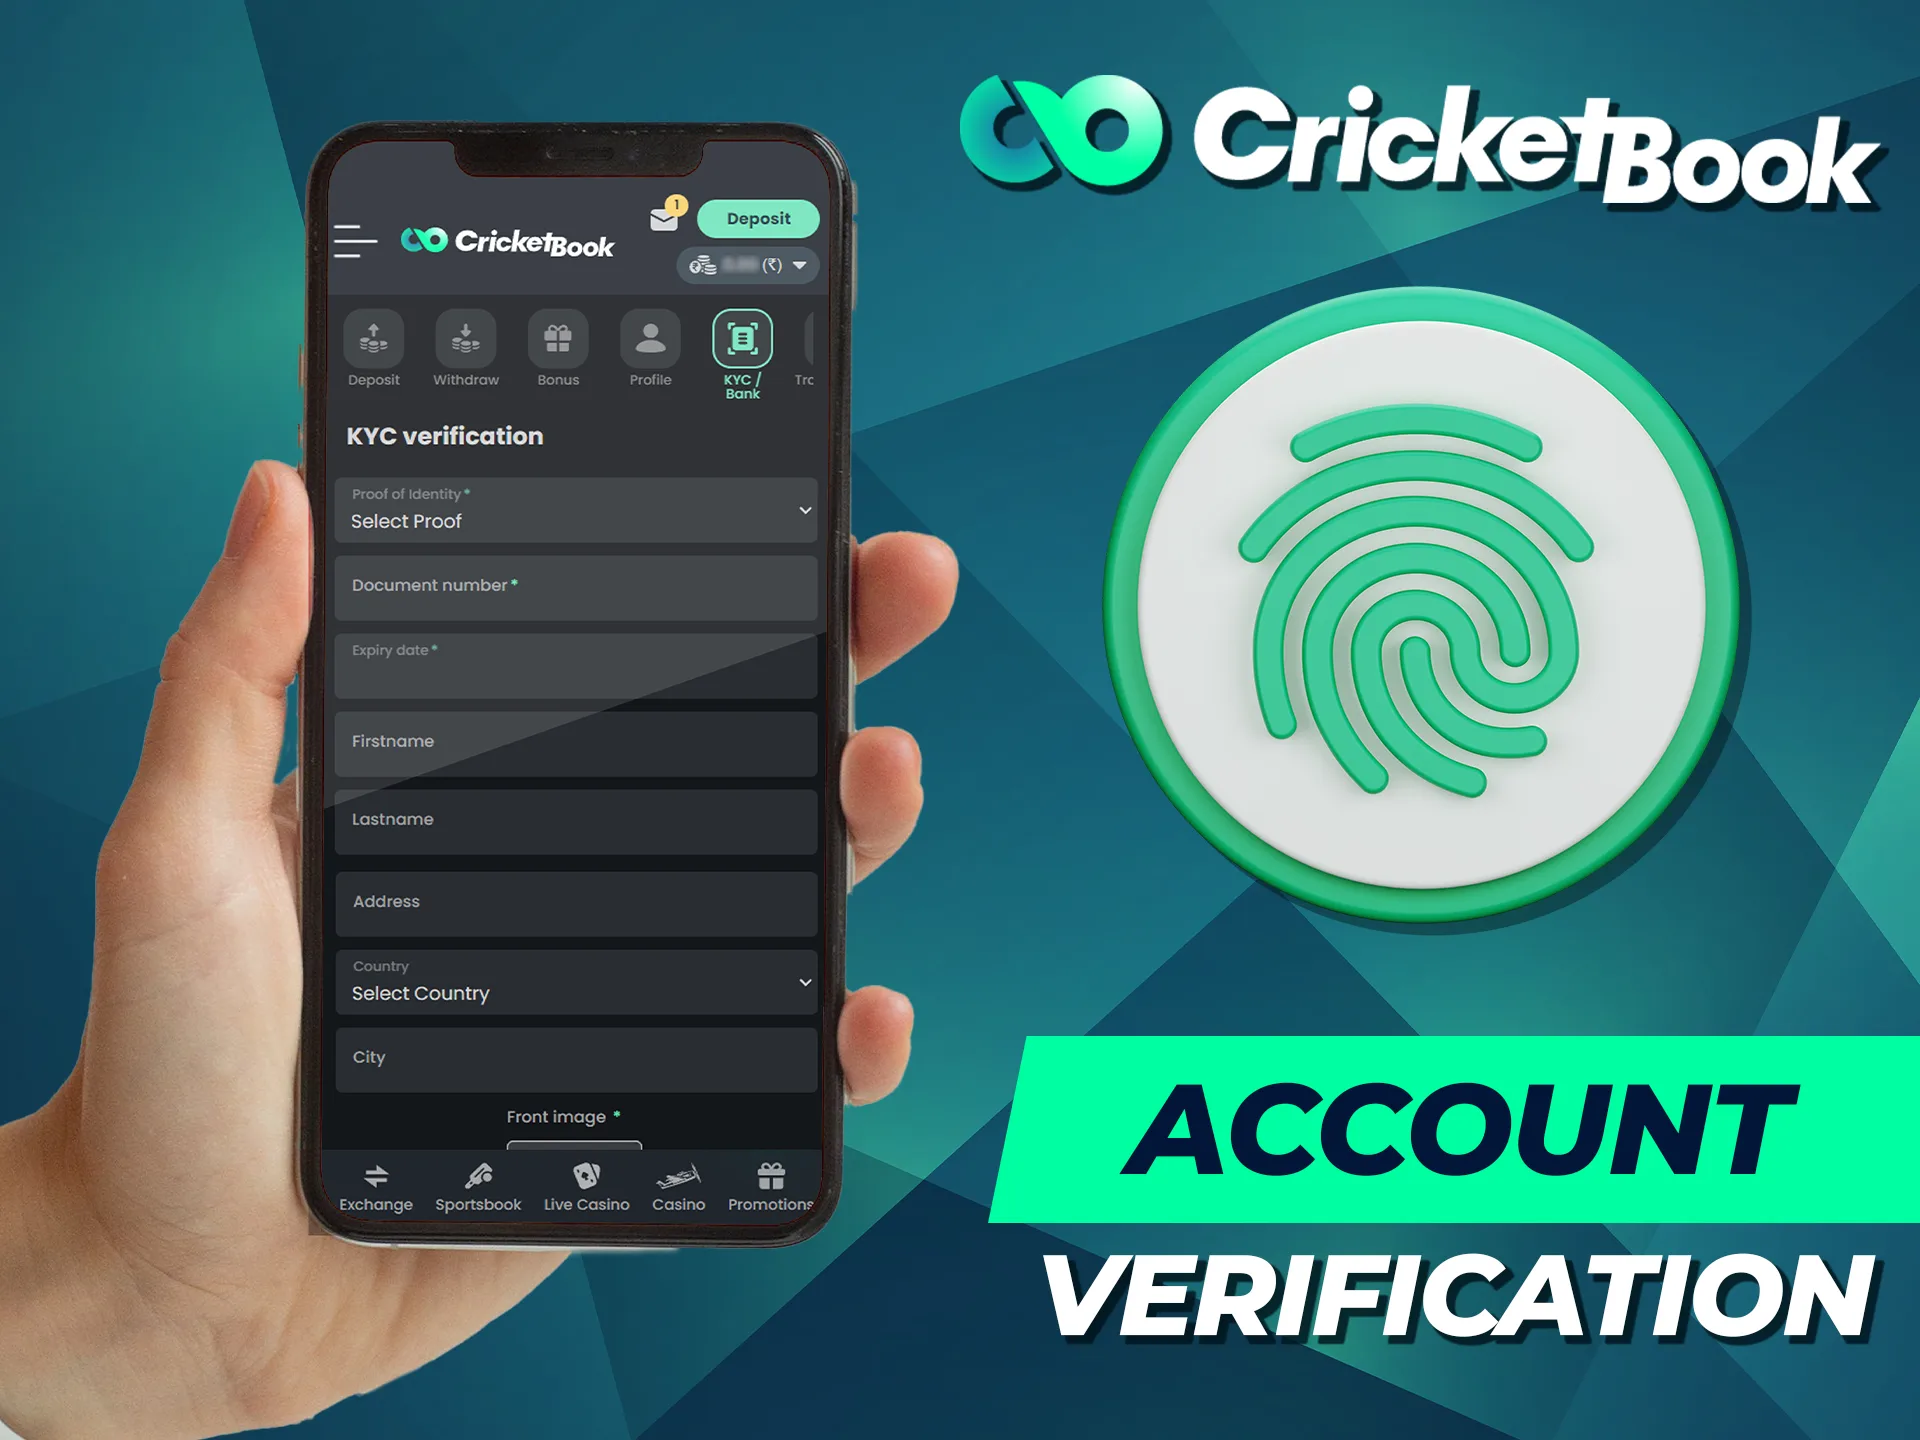 Cricketbook account verification is mandatory to prevent fraud.